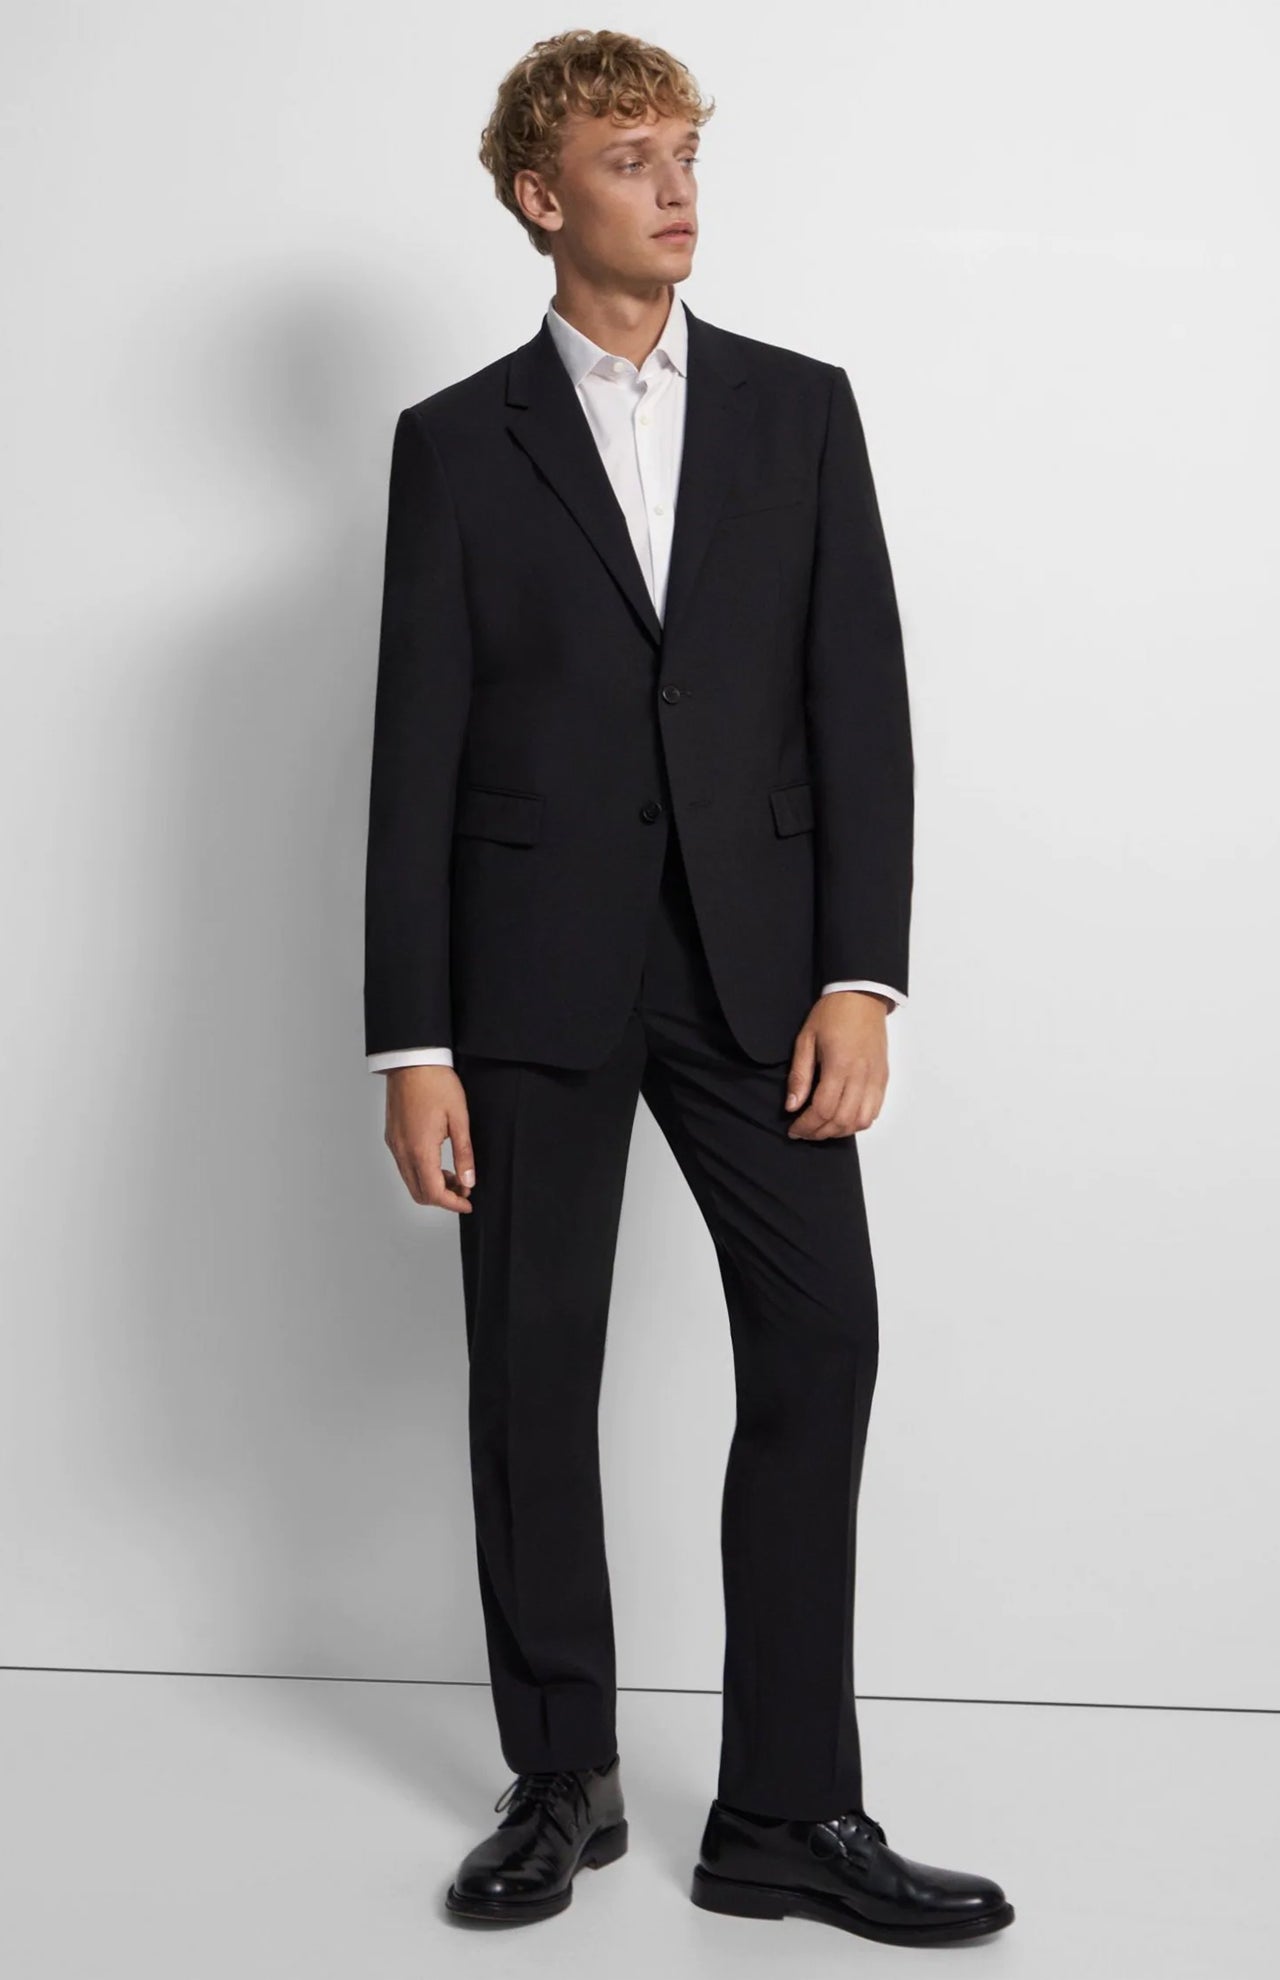 Chambers New Tailor Sportcoat Black (1037494648947)